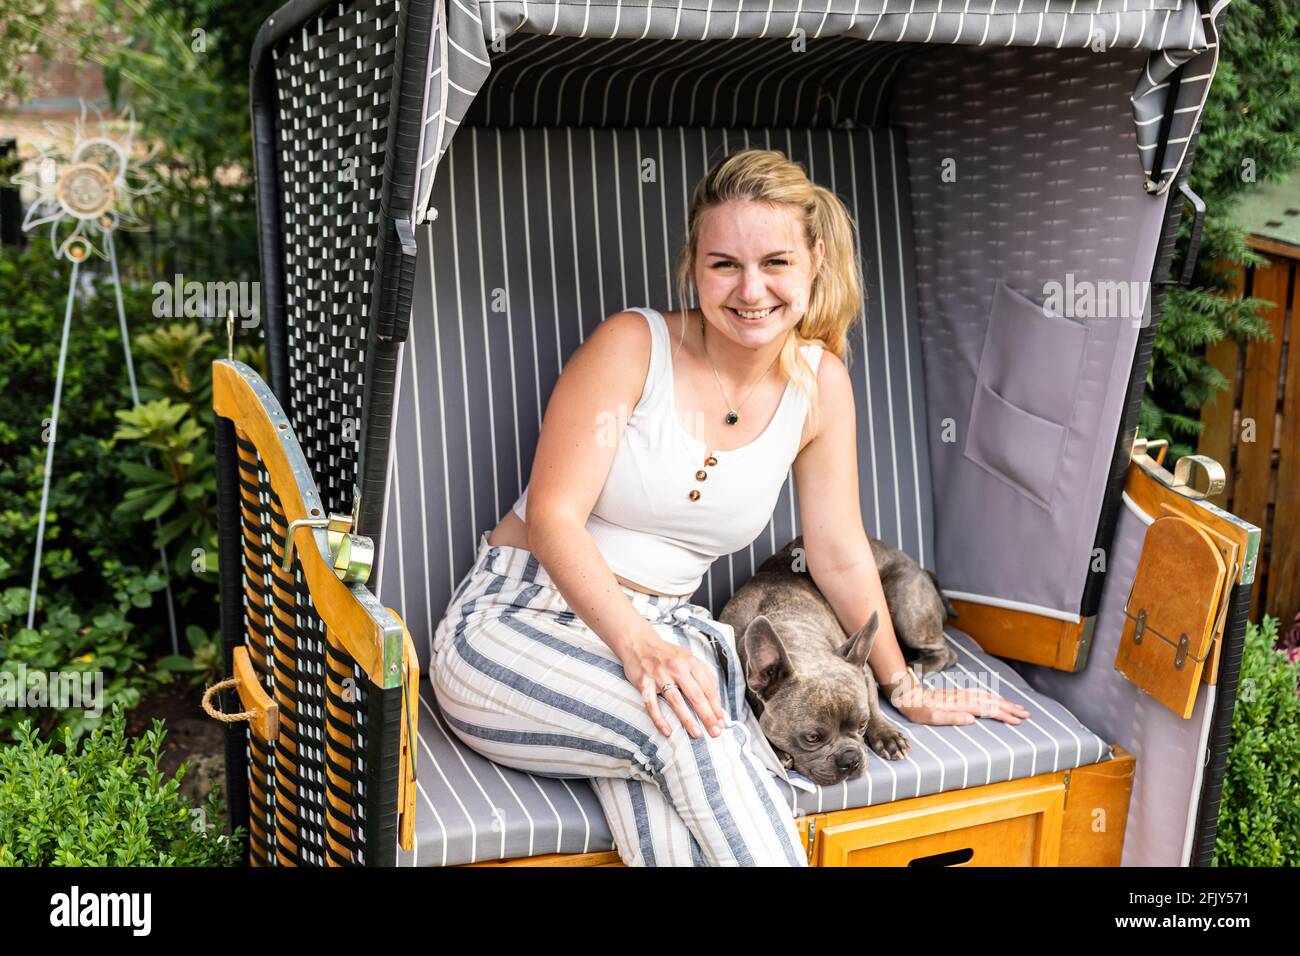 Young blonde woman sitting with her dog in her own beach chair in garden Stock Photo